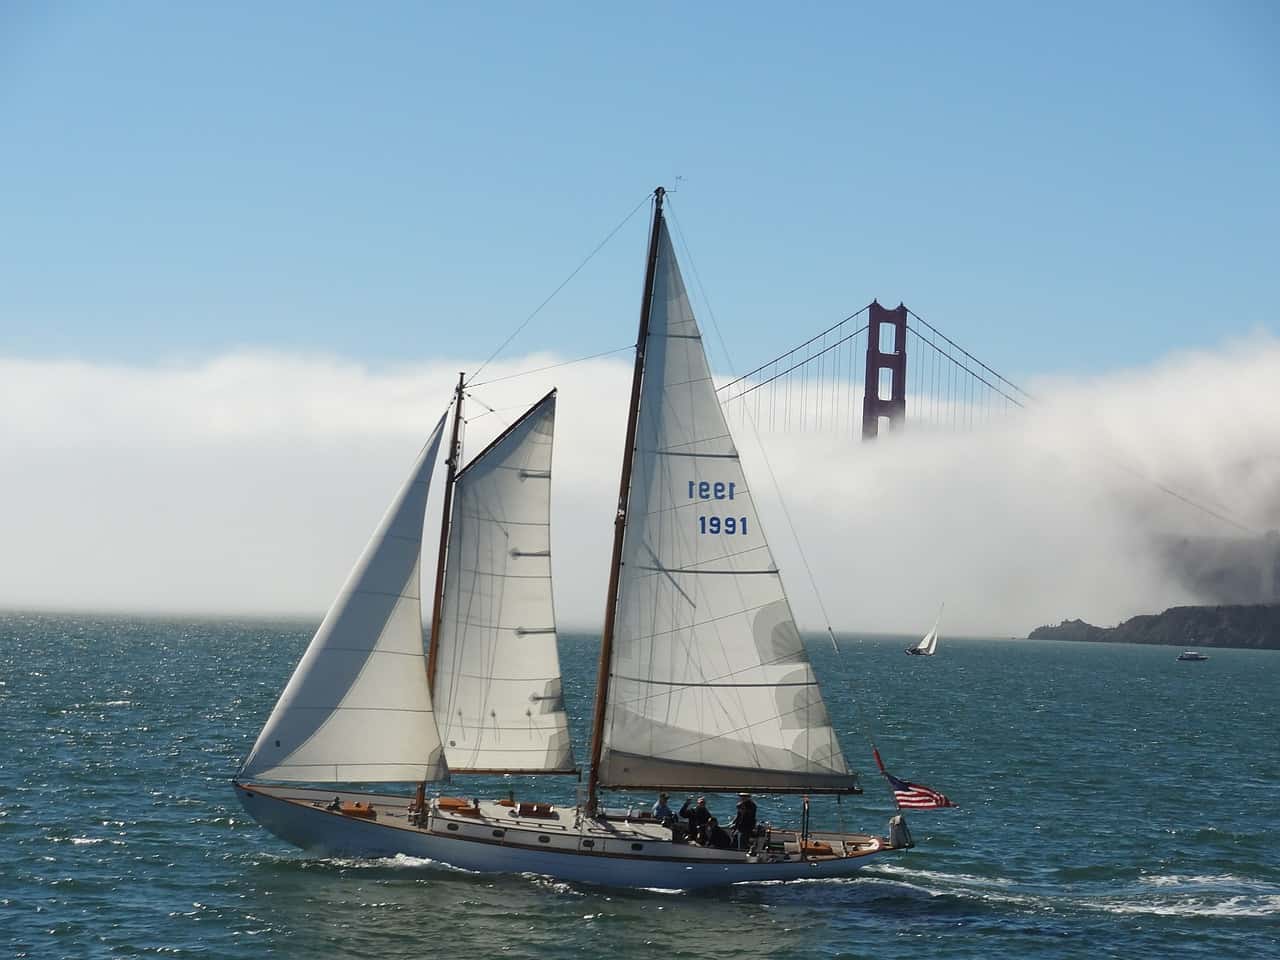 San Francisco Bay Sailing Tour with Drinks is a great San Francisco wine tour option